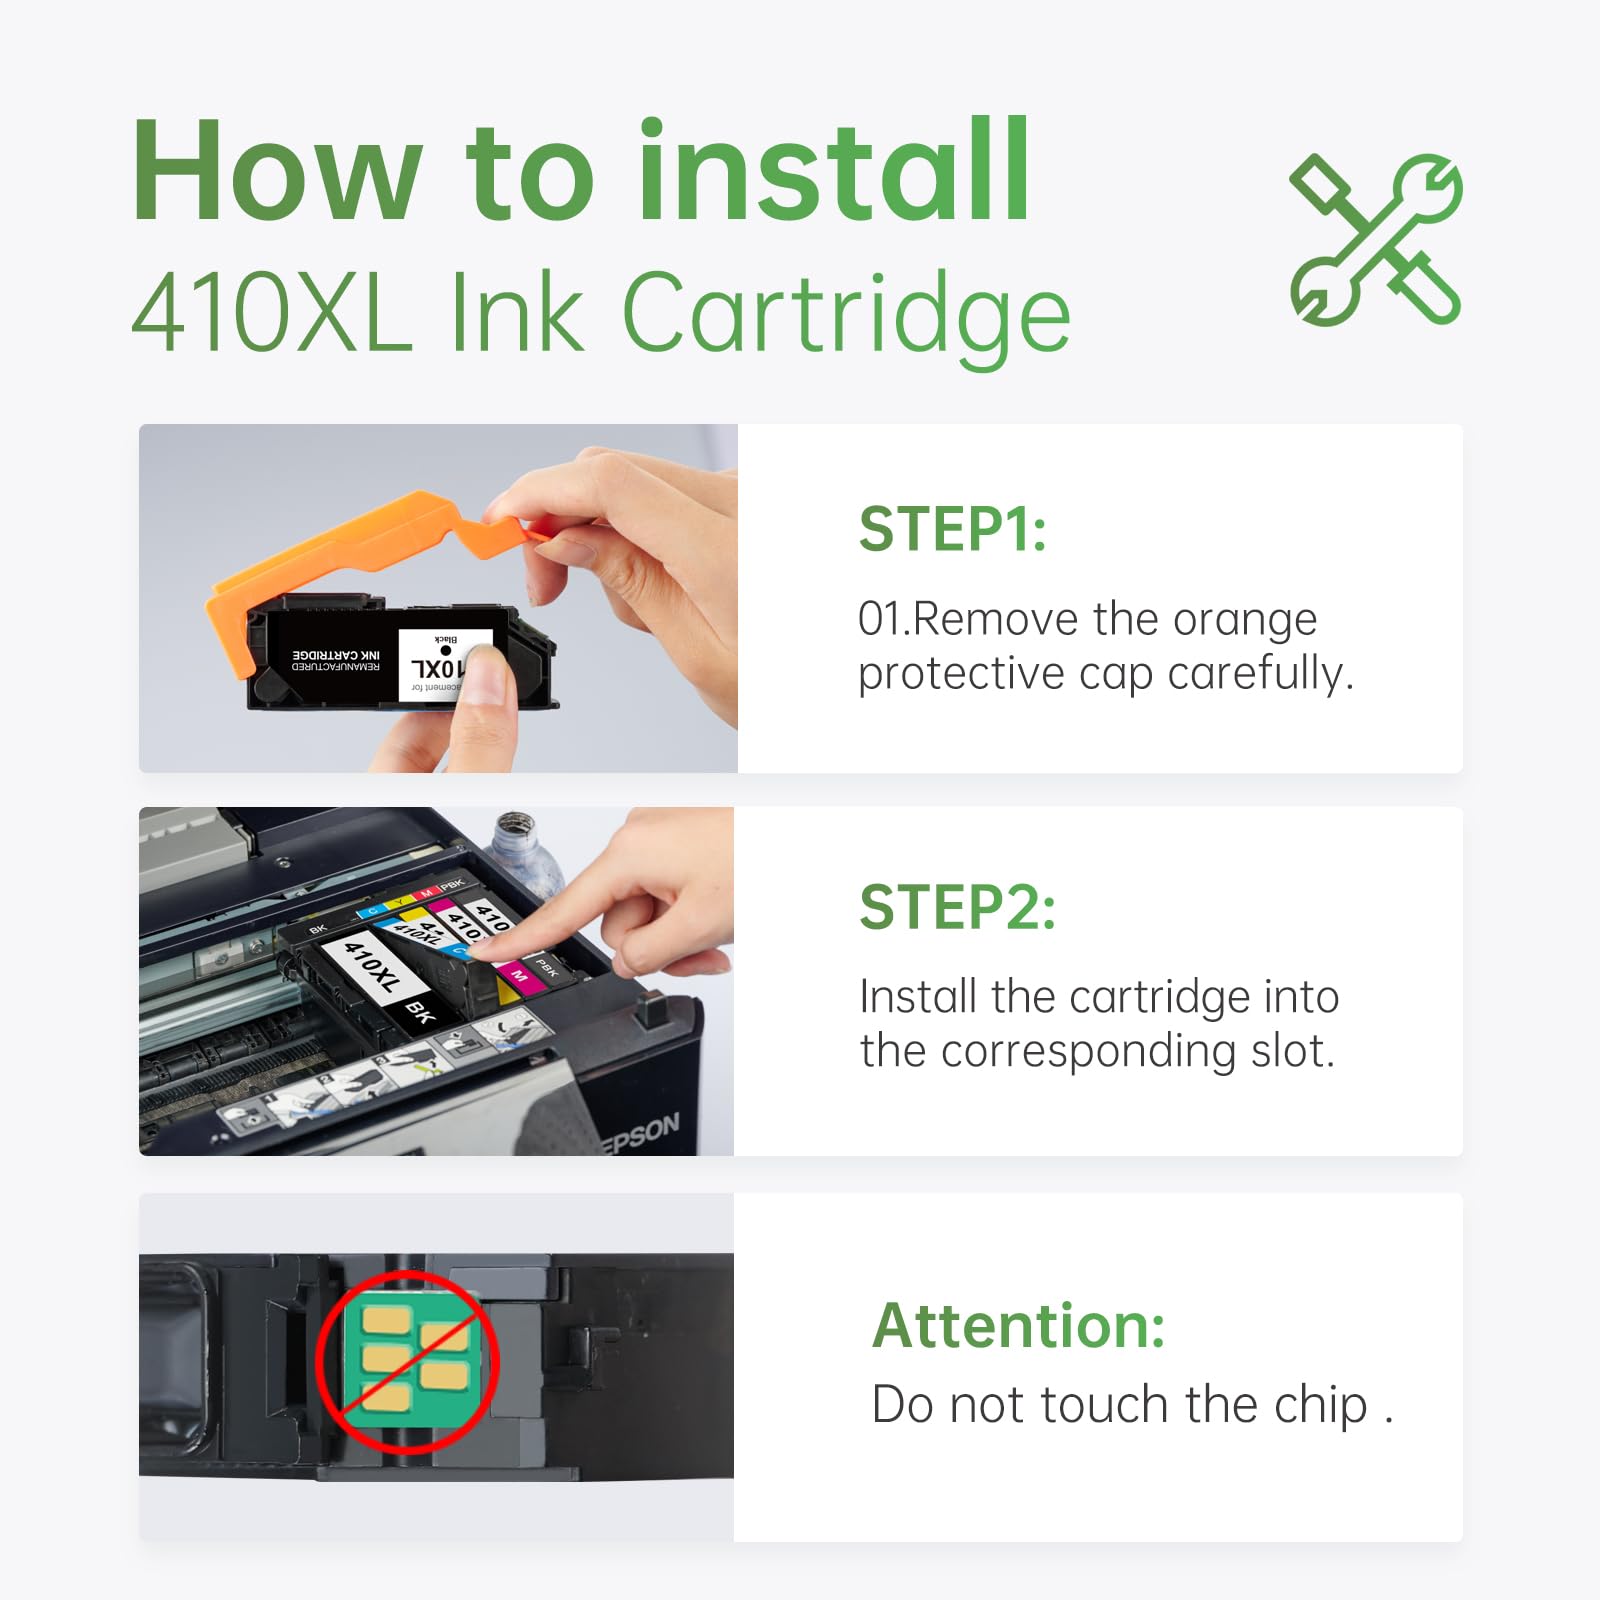 Step-by-step guide on how to install 410XL ink cartridges, including removing the protective cap and installing in the slot